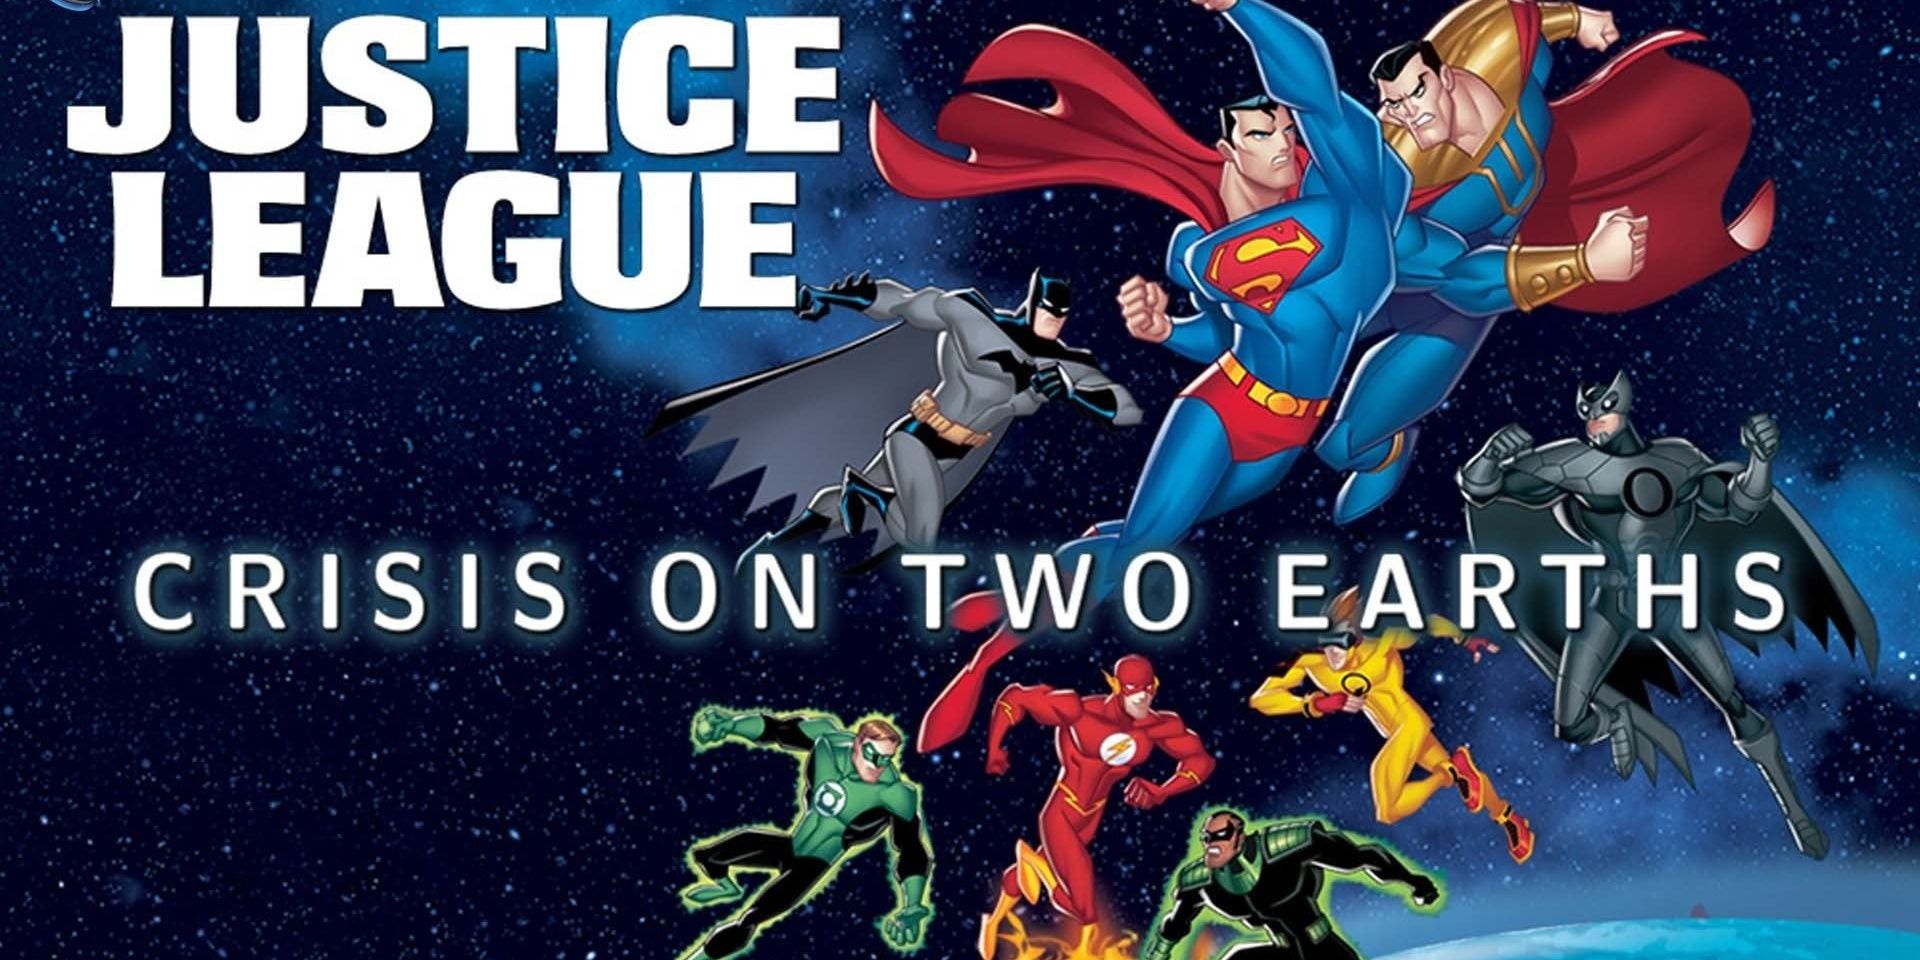 justice league crisis on two earths full movie 123